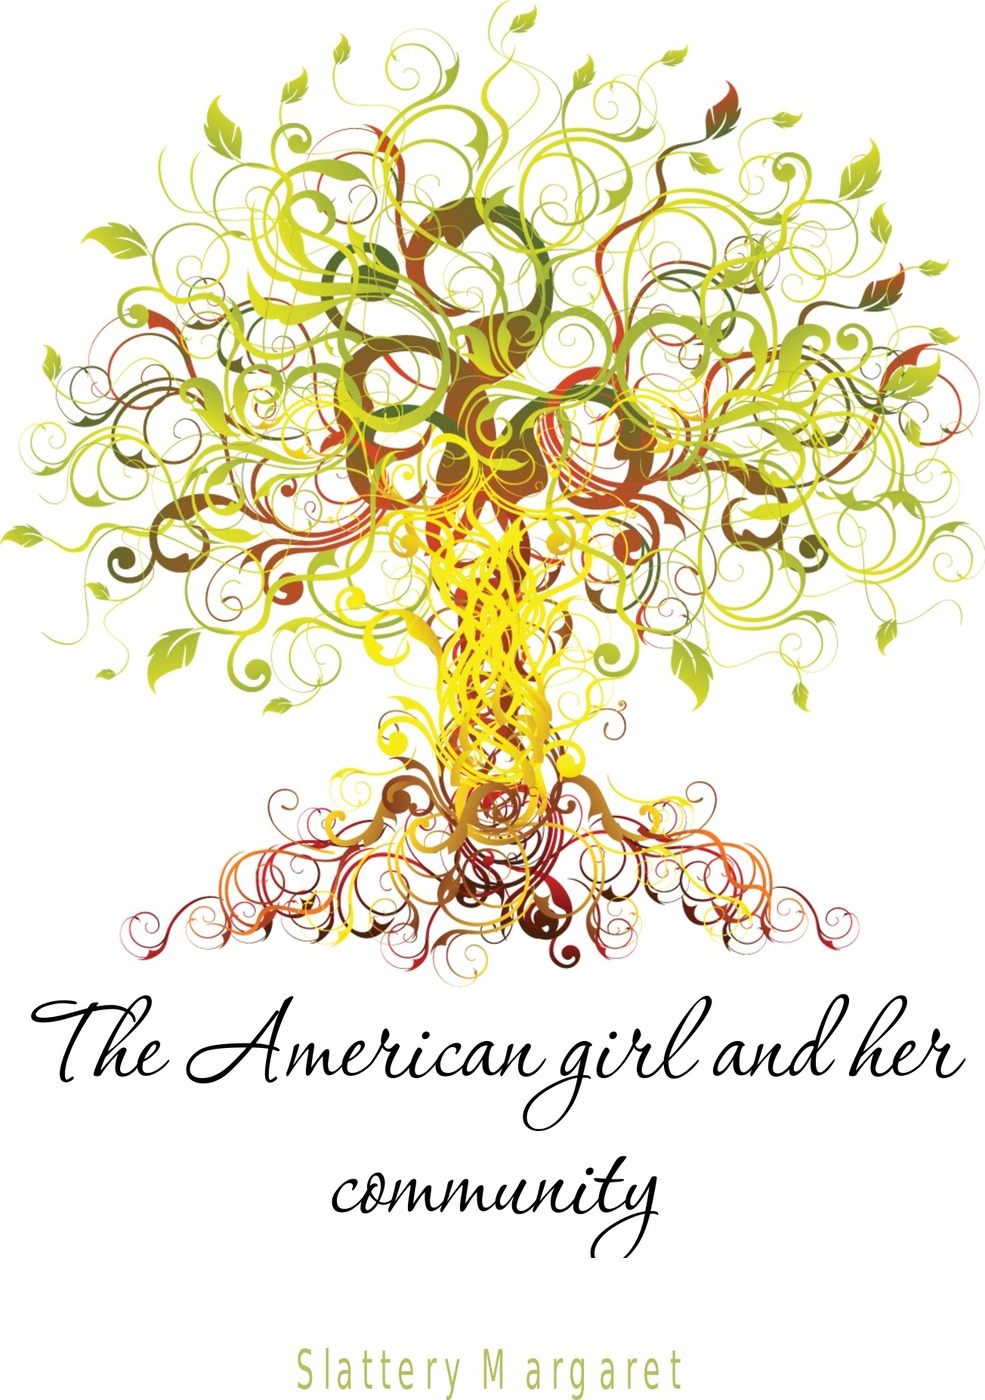 The American girl and her community